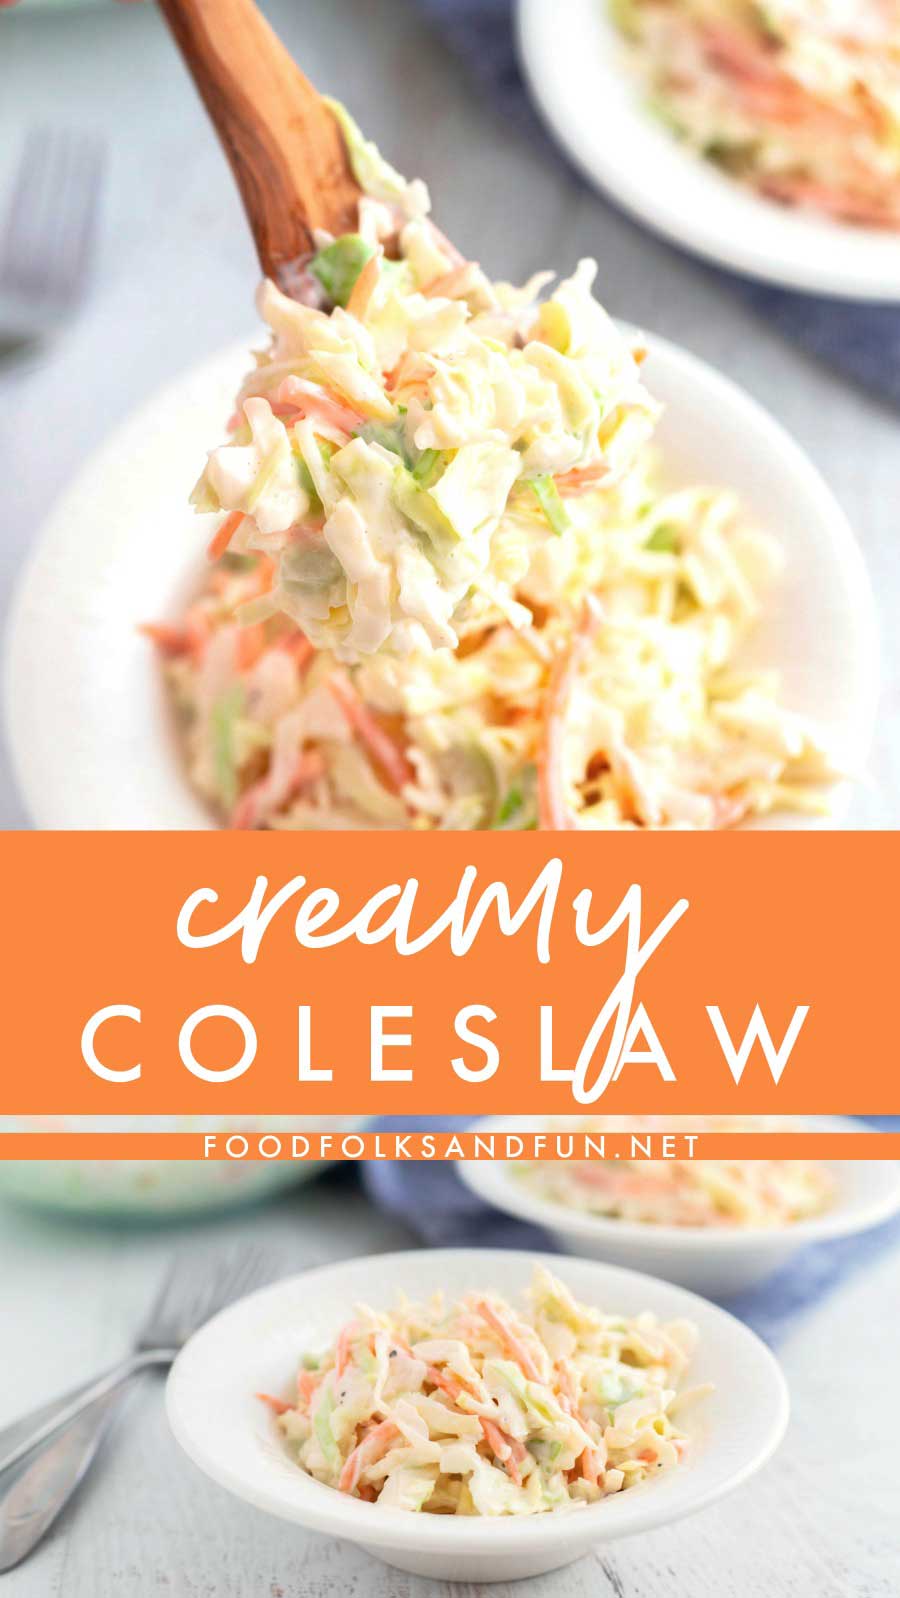 Whether you say coleslaw, cole slaw, or cold slaw, this coleslaw recipe is creamy, delicious, and so easy to make. This homemade coleslaw is the perfect side dish for cookouts, parties, and potlucks.  via @foodfolksandfun